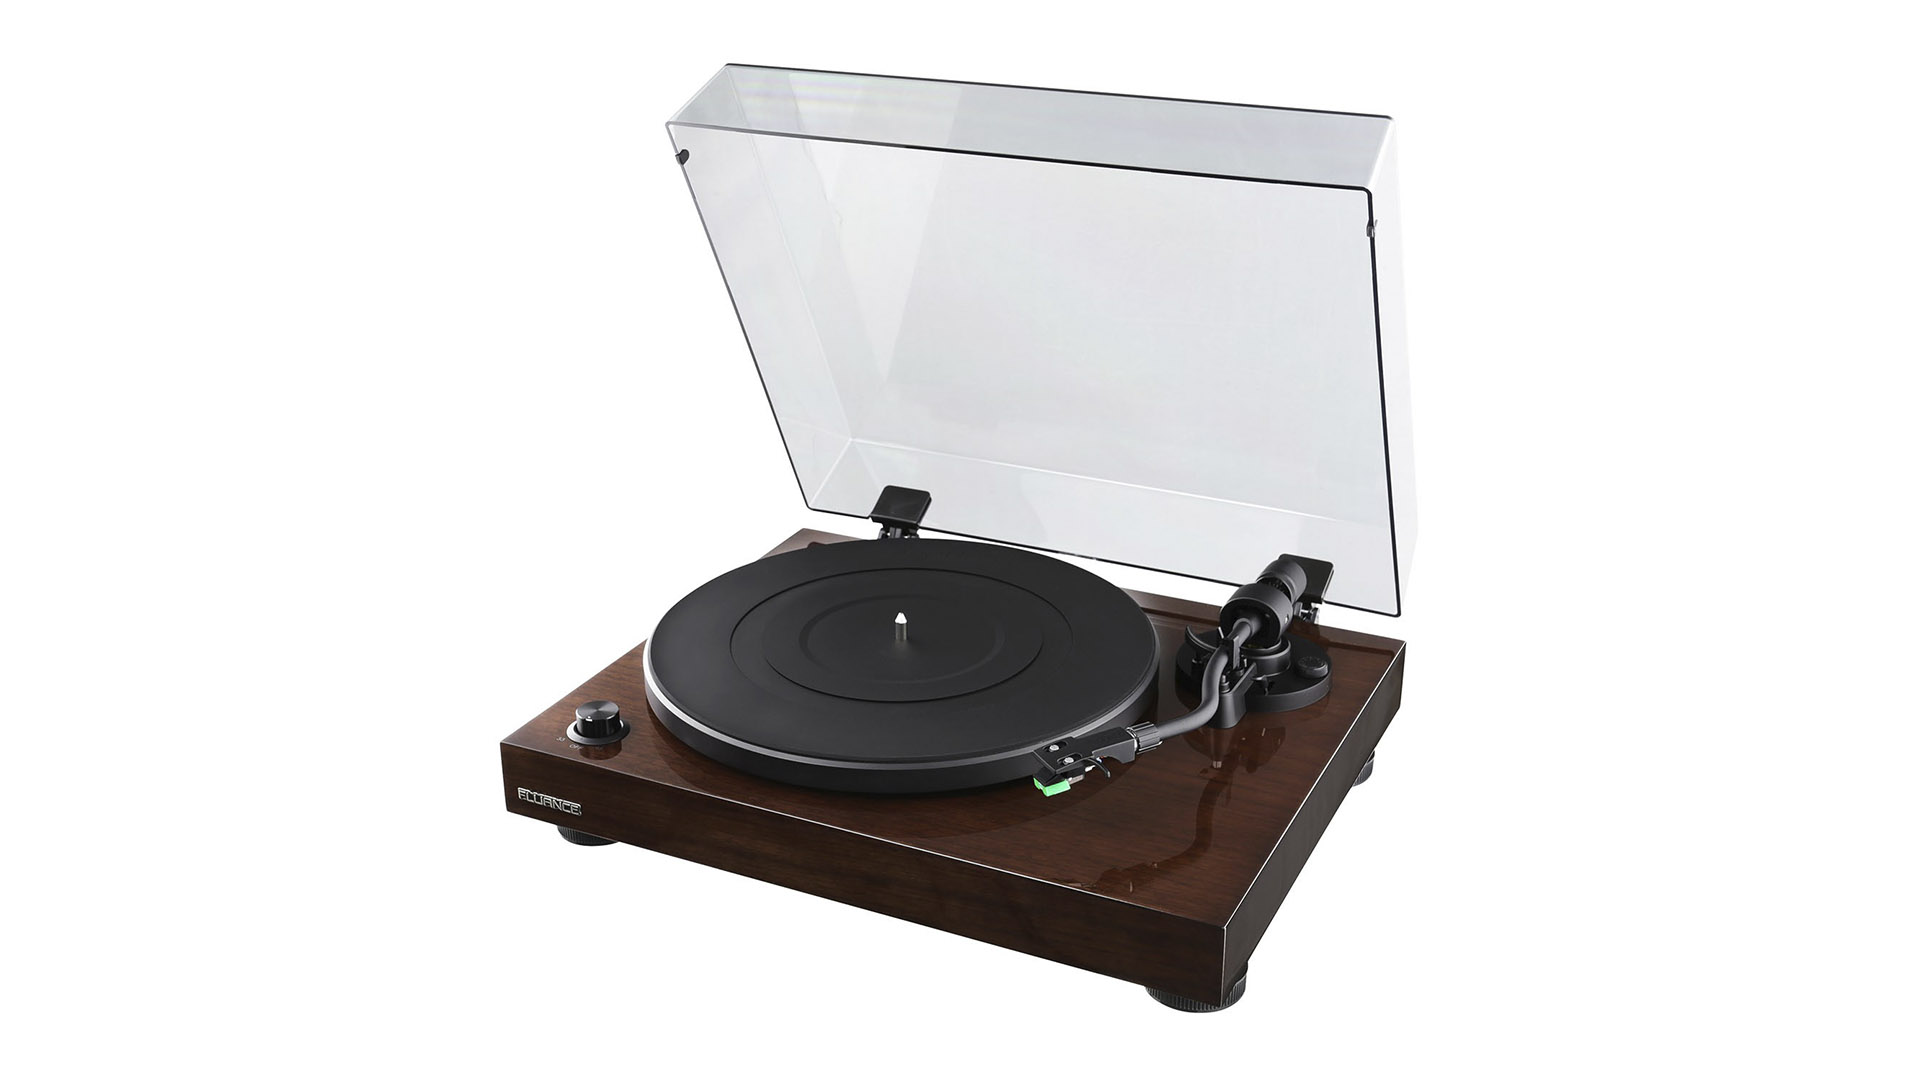 The Fluance RT81 record player with a dark brown finish